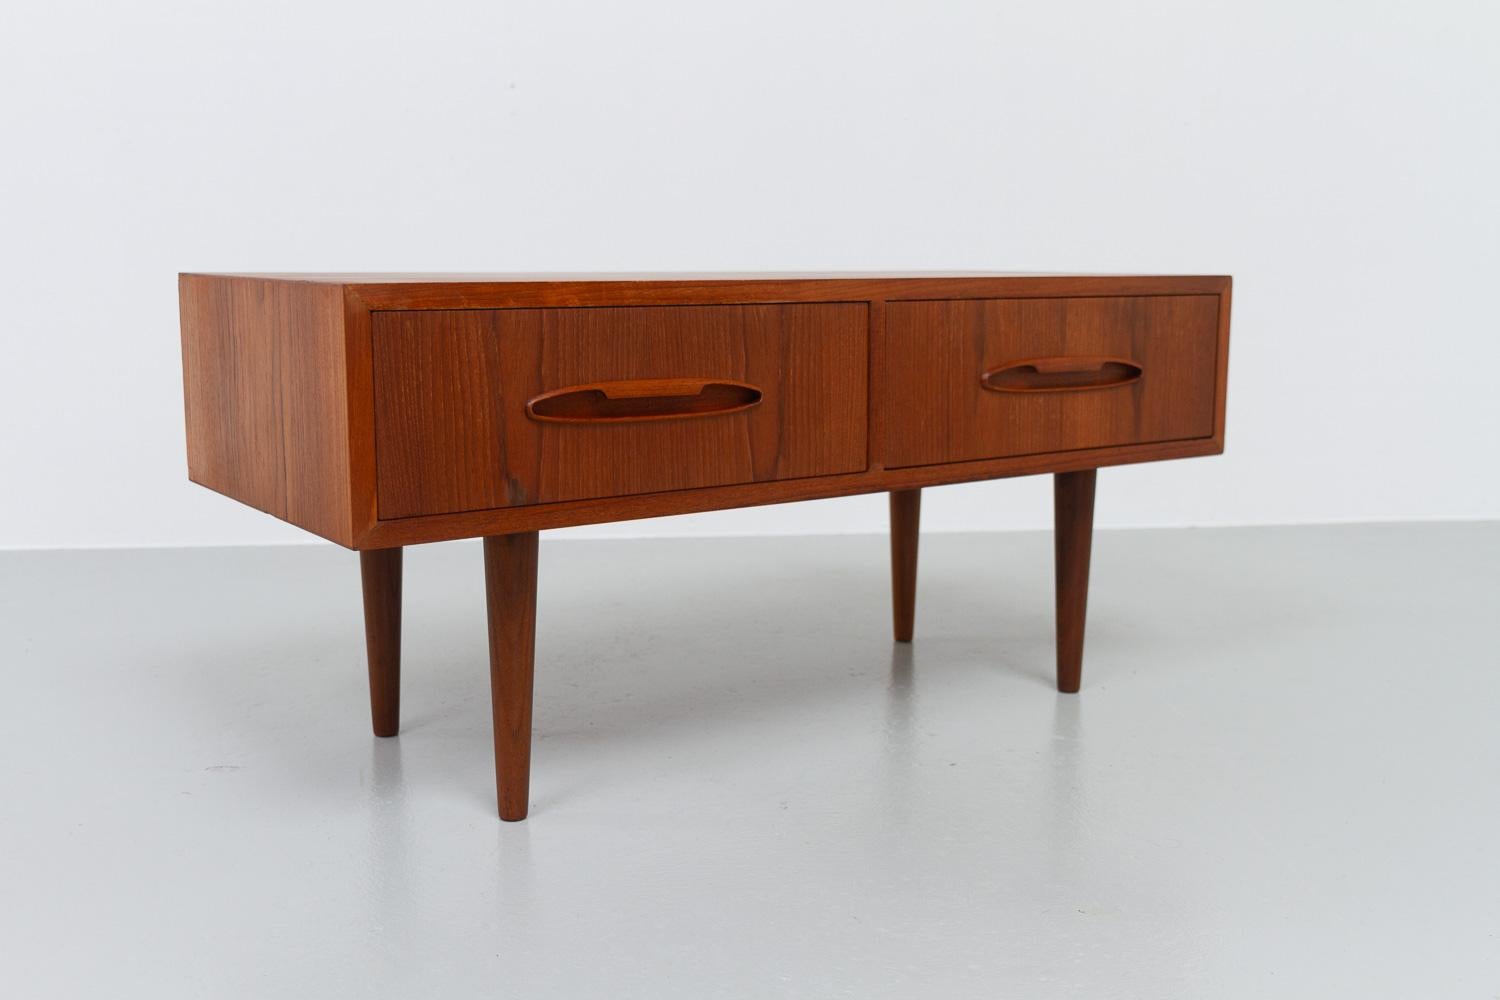 Vintage Danish Teak Dresser, 1960s.
Elegant low dresser with two drawers standing on four round tapered legs in solid teak. Drawers with long sculpted pulls. 
Very versatile Danish mid-century modern piece which can suit many needs. For an example